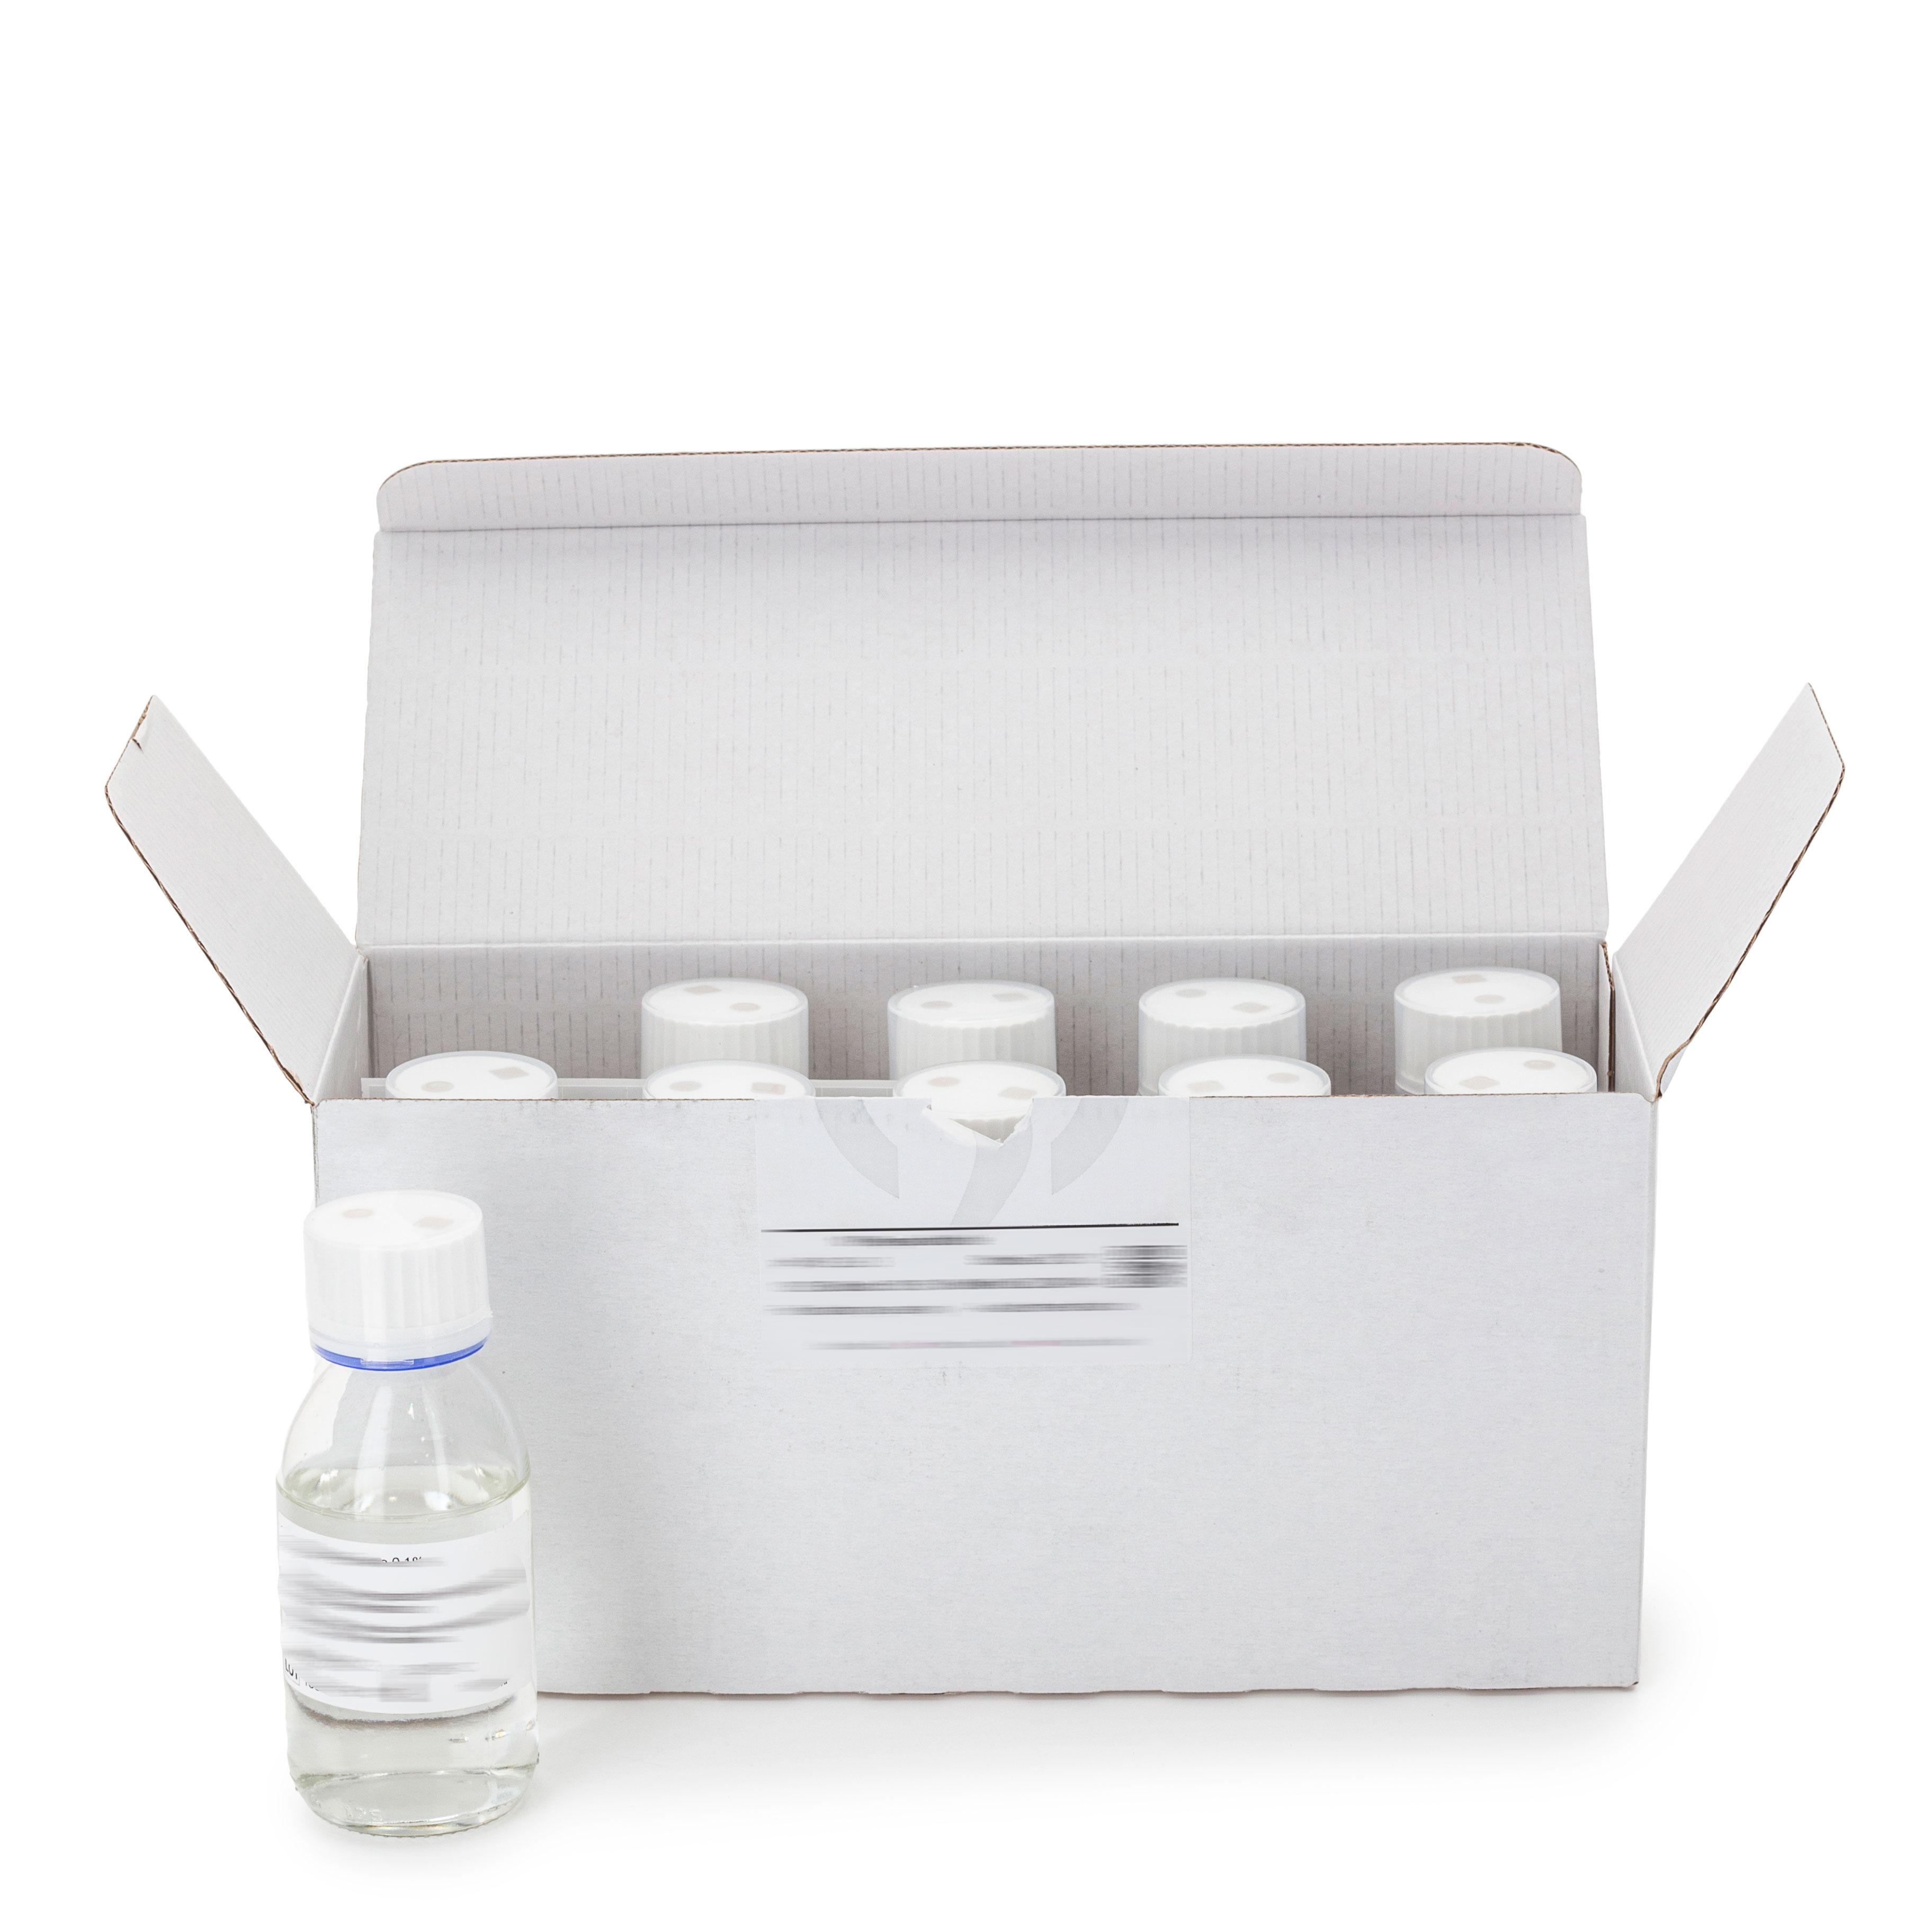 DE Neutralizing Agar - Solid culture medium for the neutralization and testing of antiseptics and disinfectants.